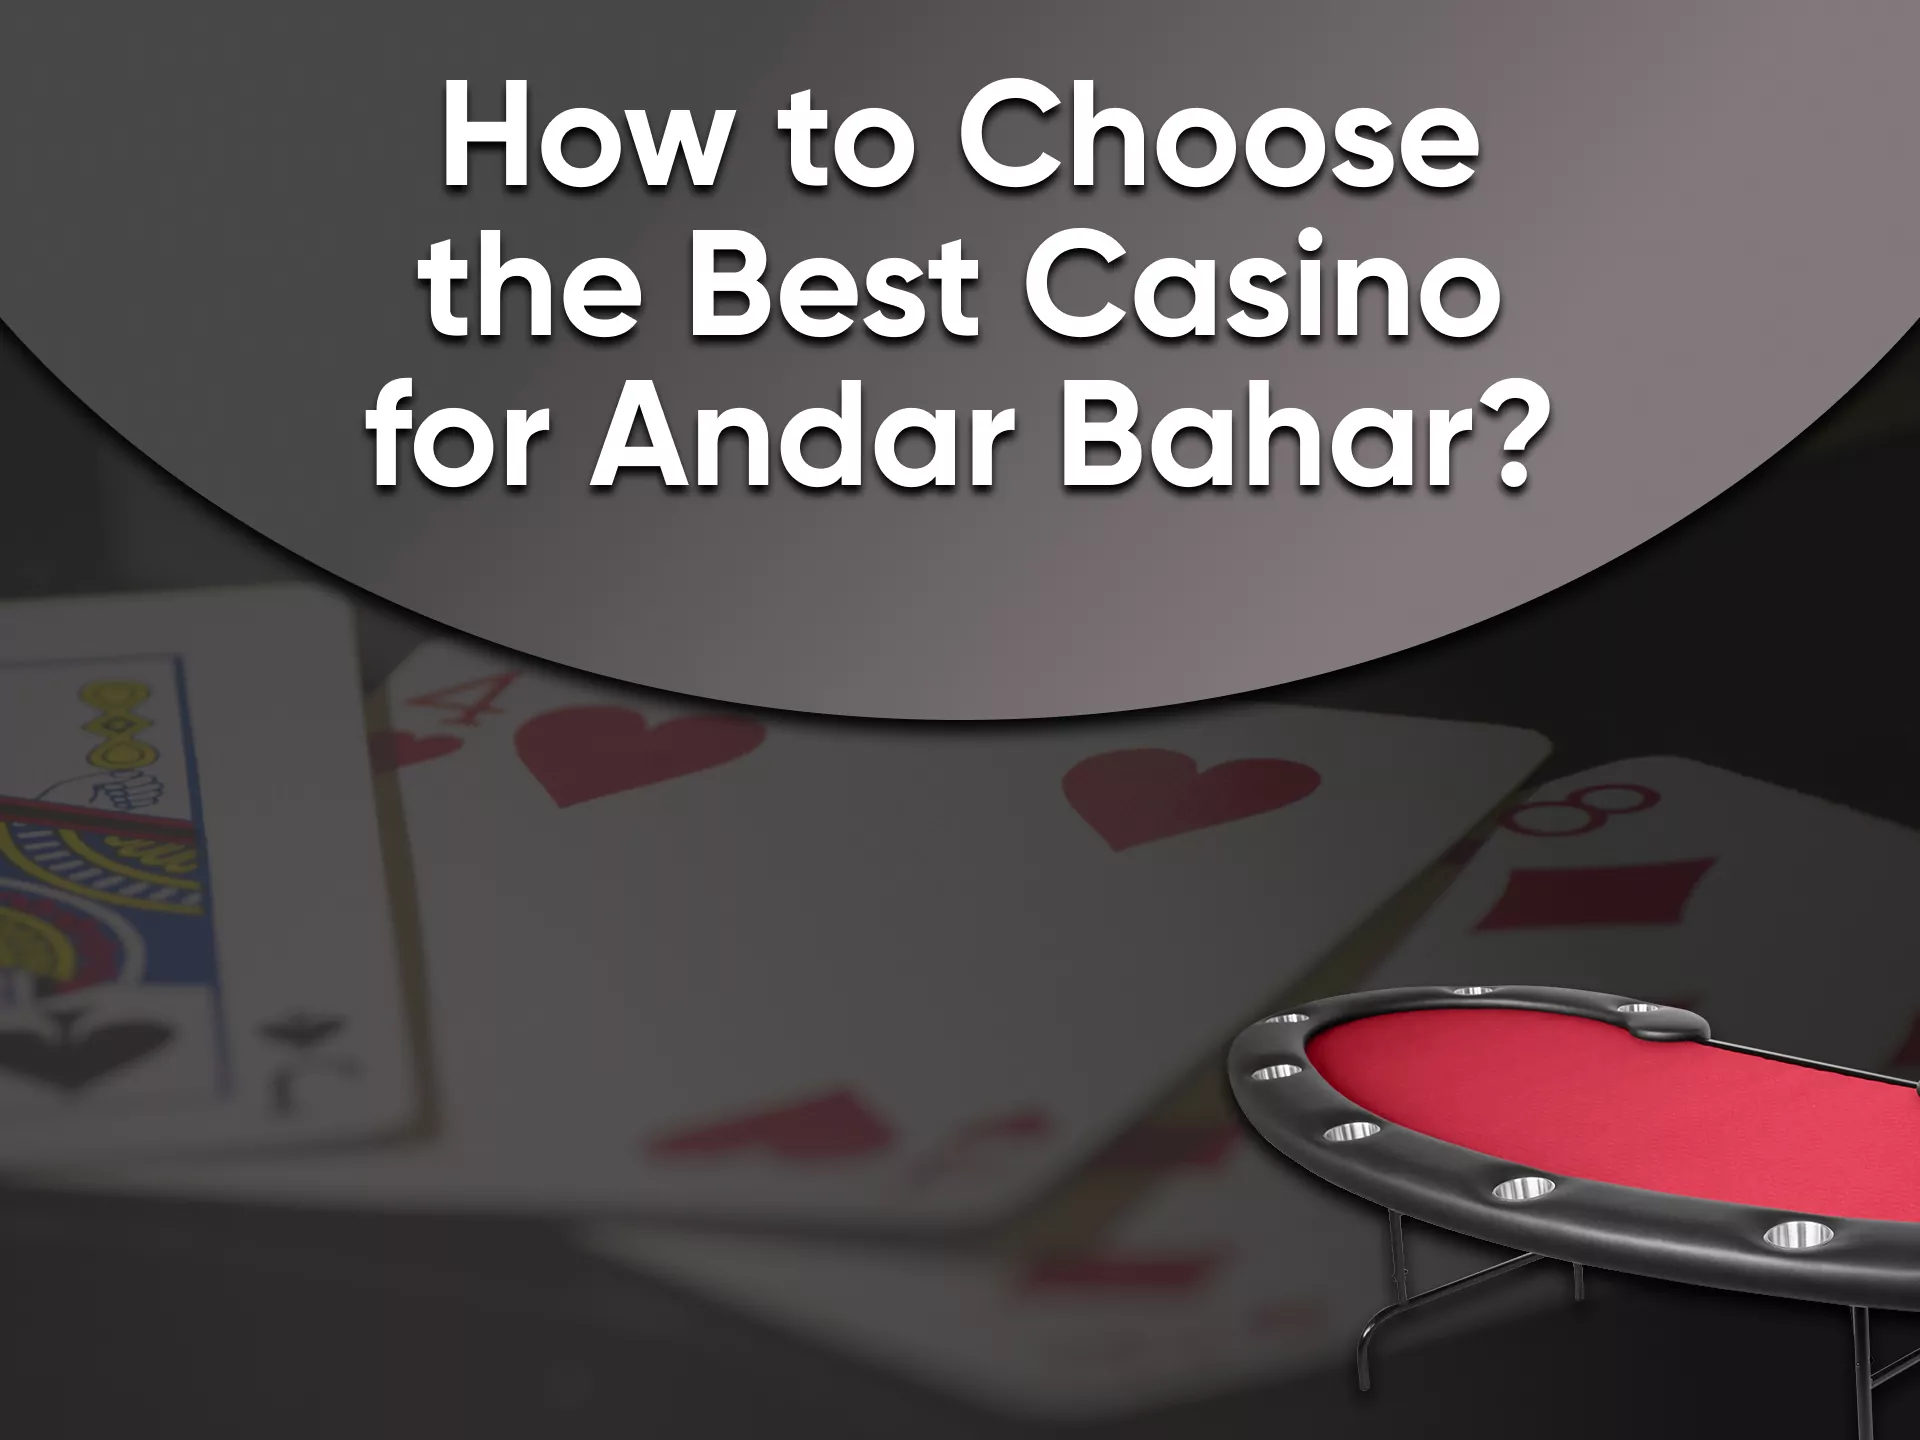 Choose a trusted service to play Andar Bahar.